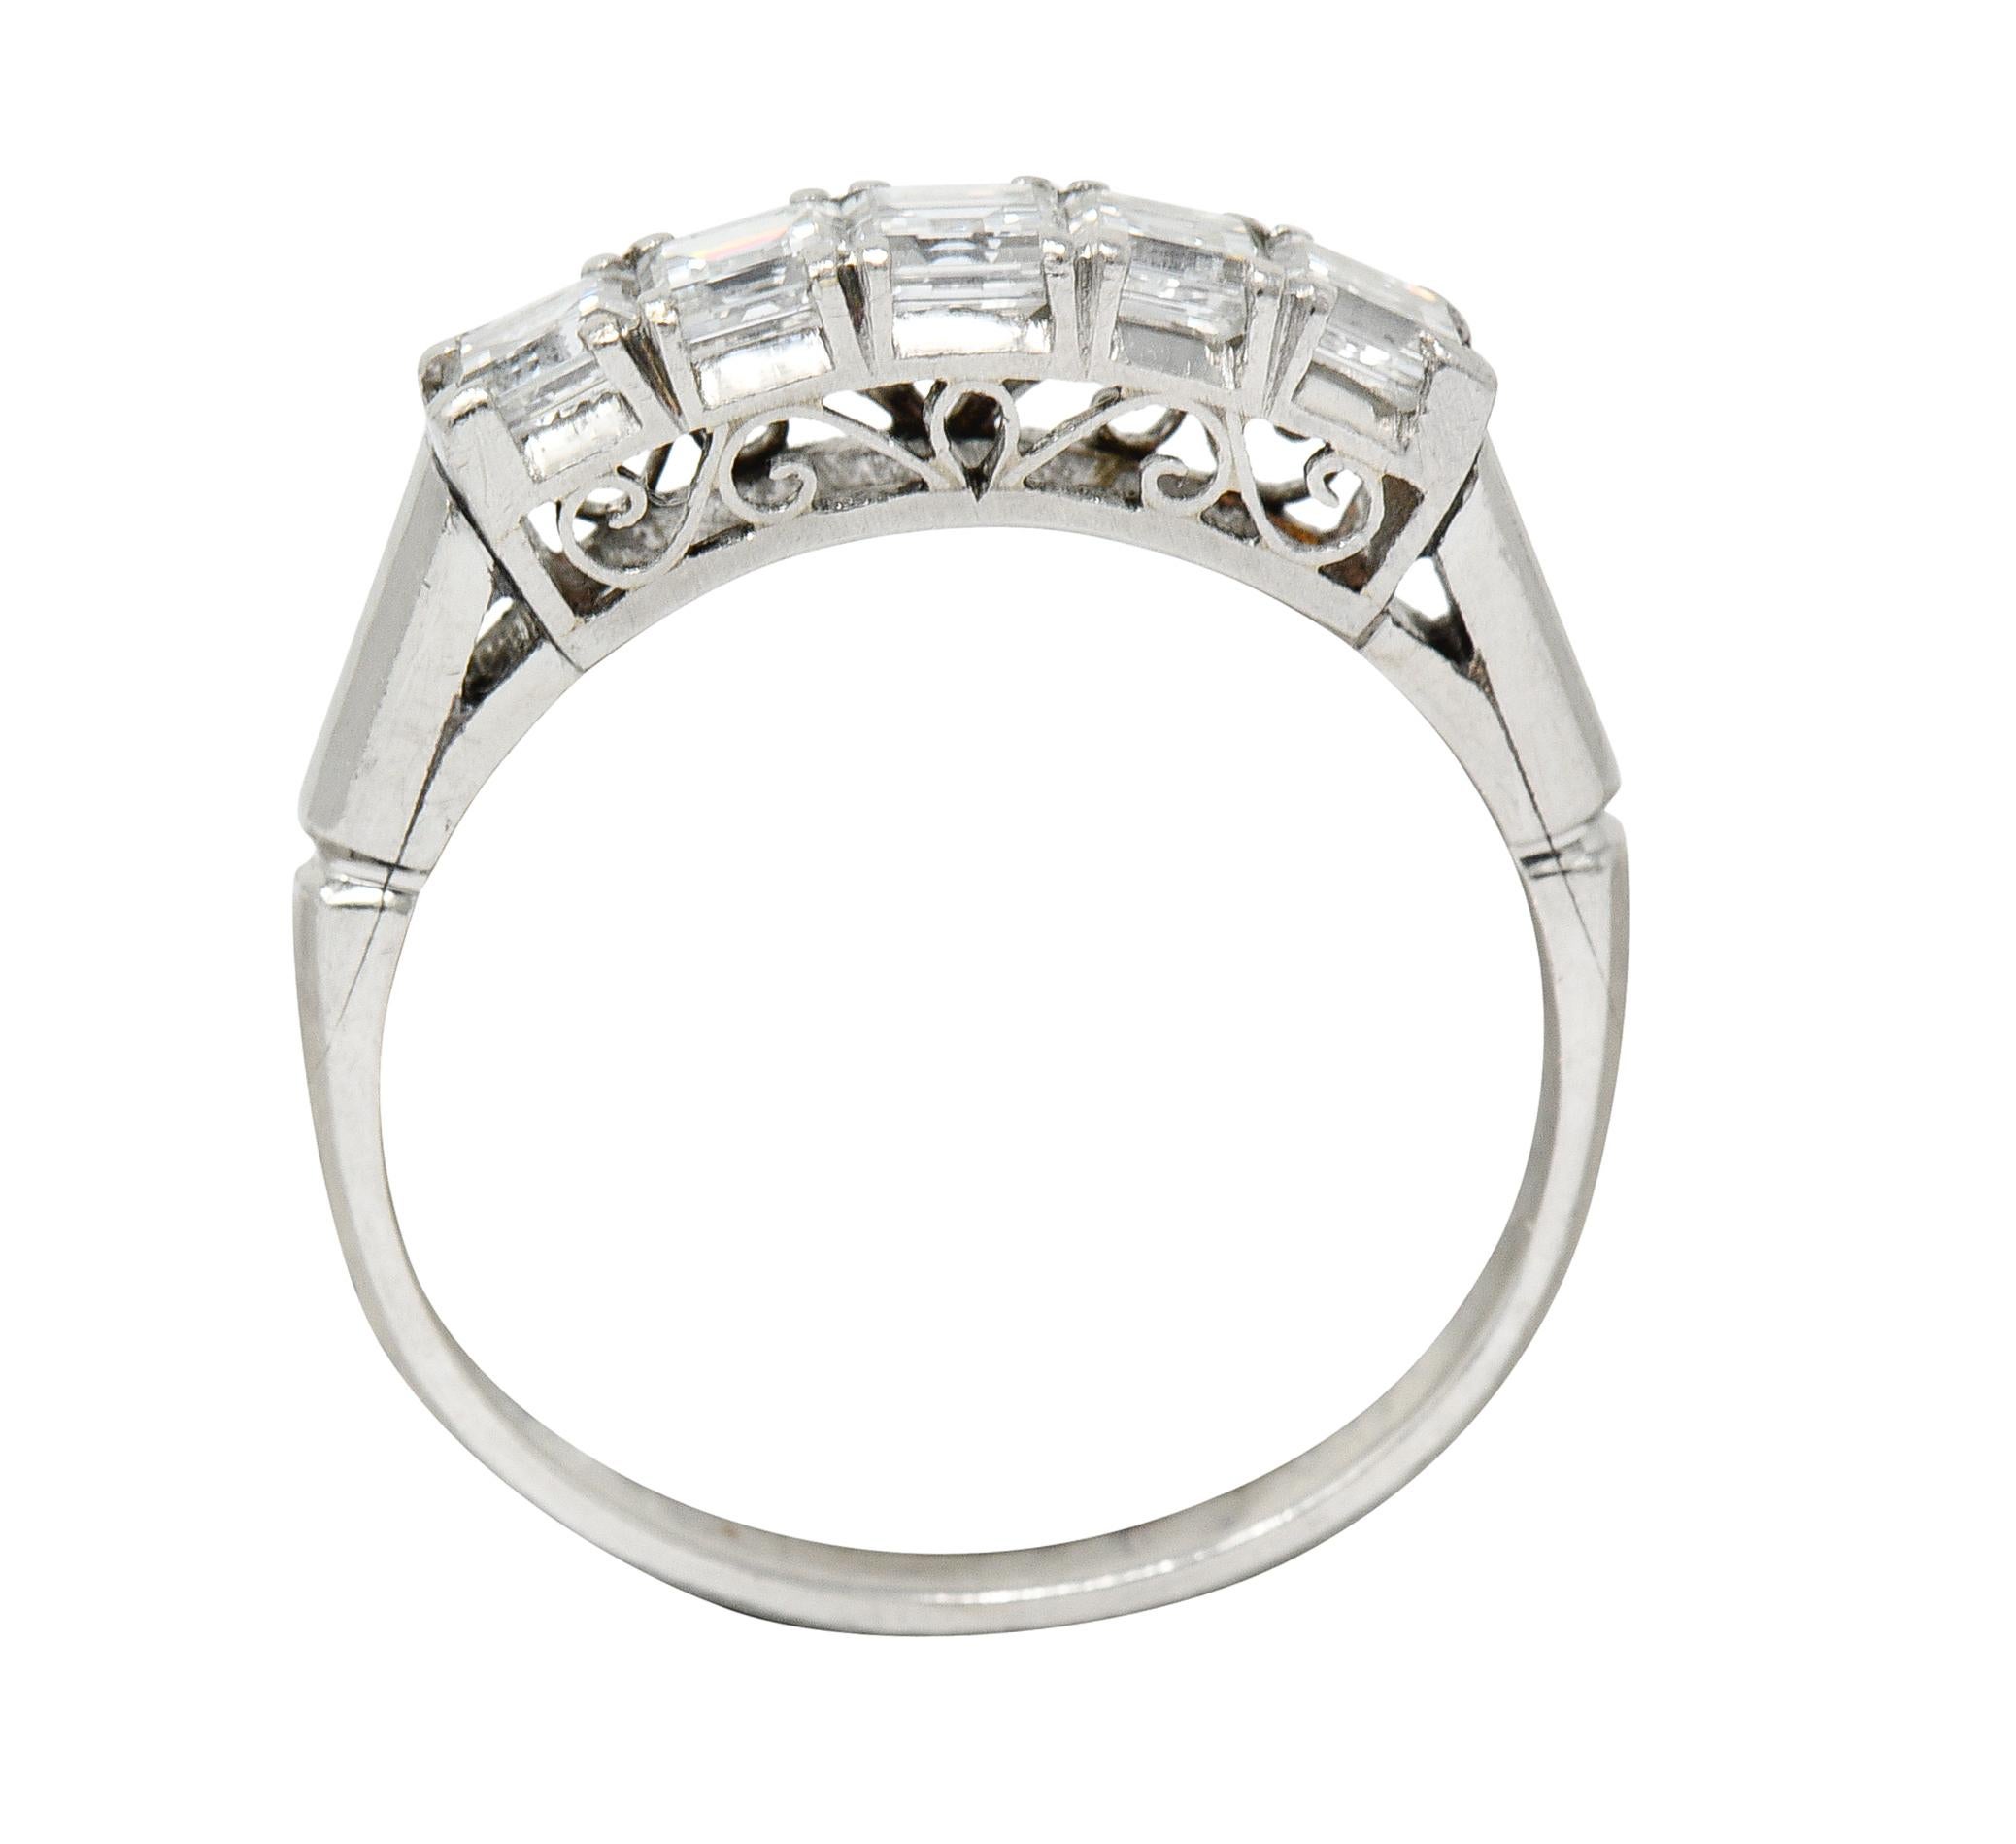 Endearing 0.78 Carat Diamond Platinum Five Stone Band Ring For Sale 2